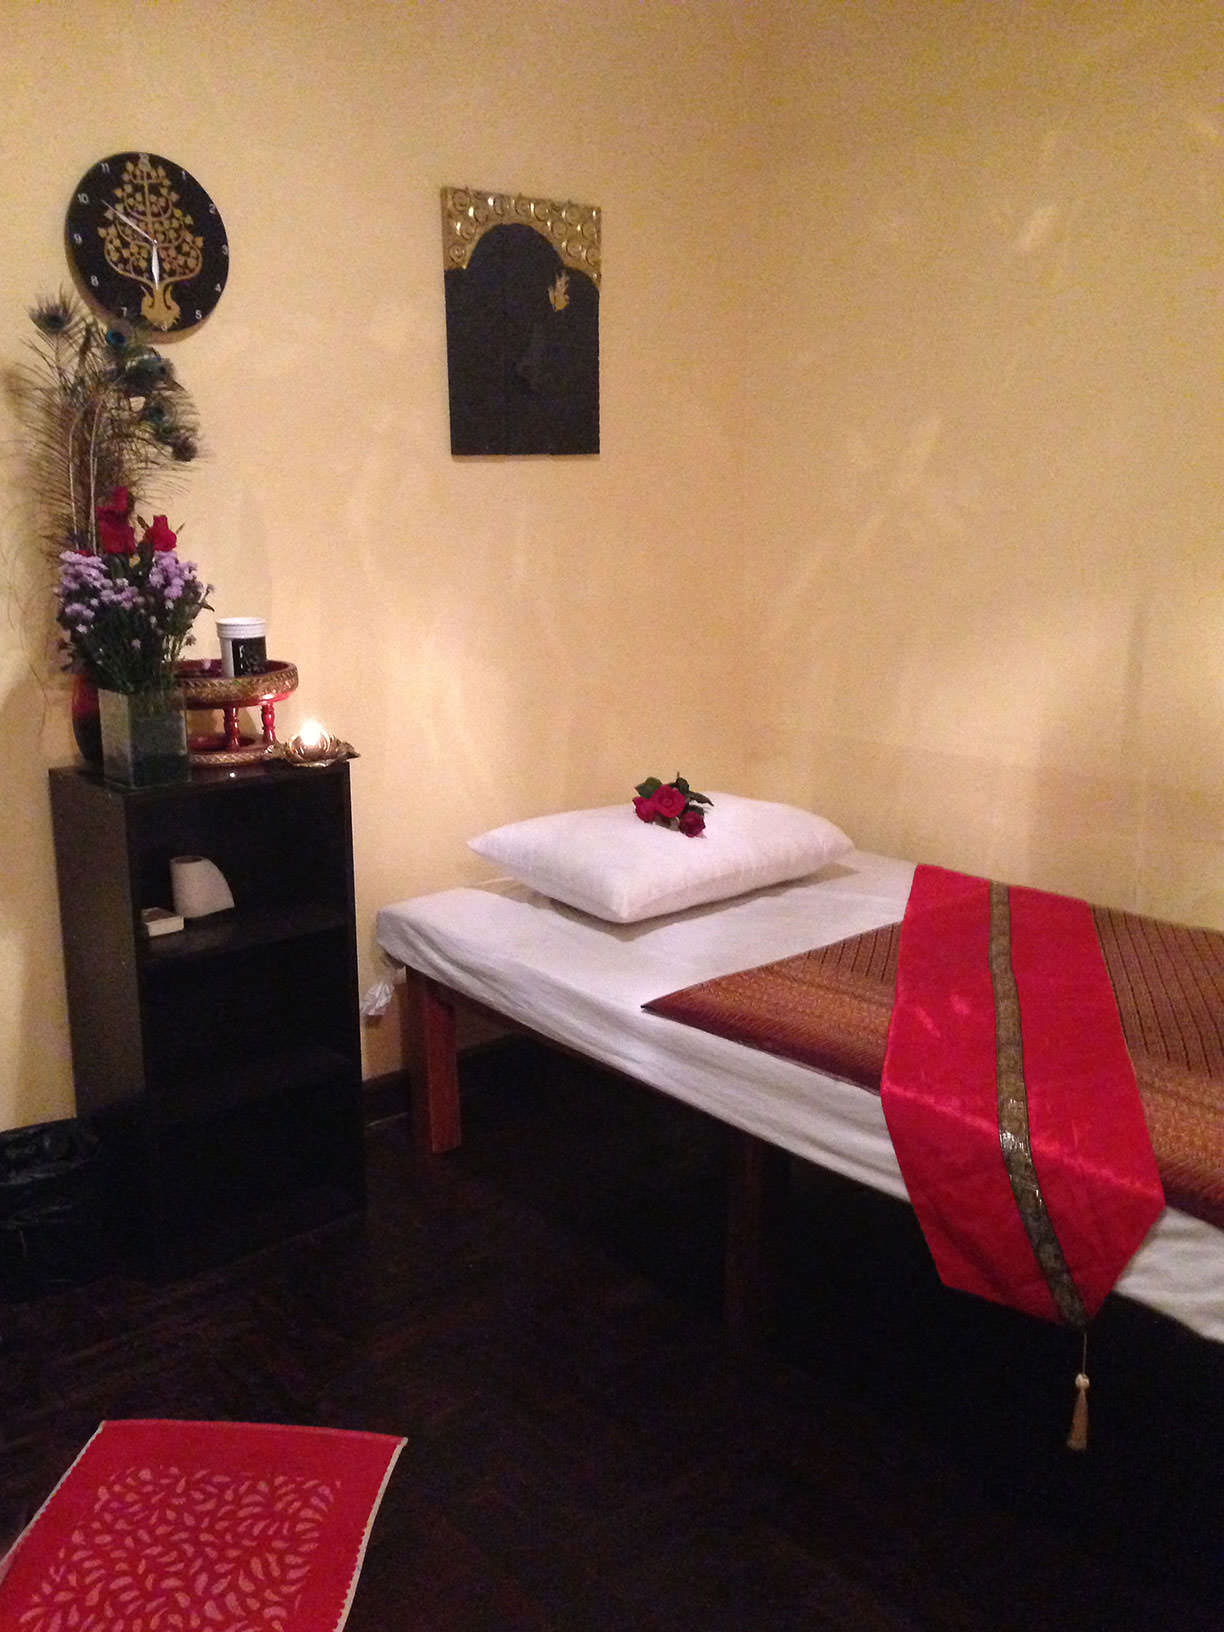 The bed are spacious at HoneyBee Massage